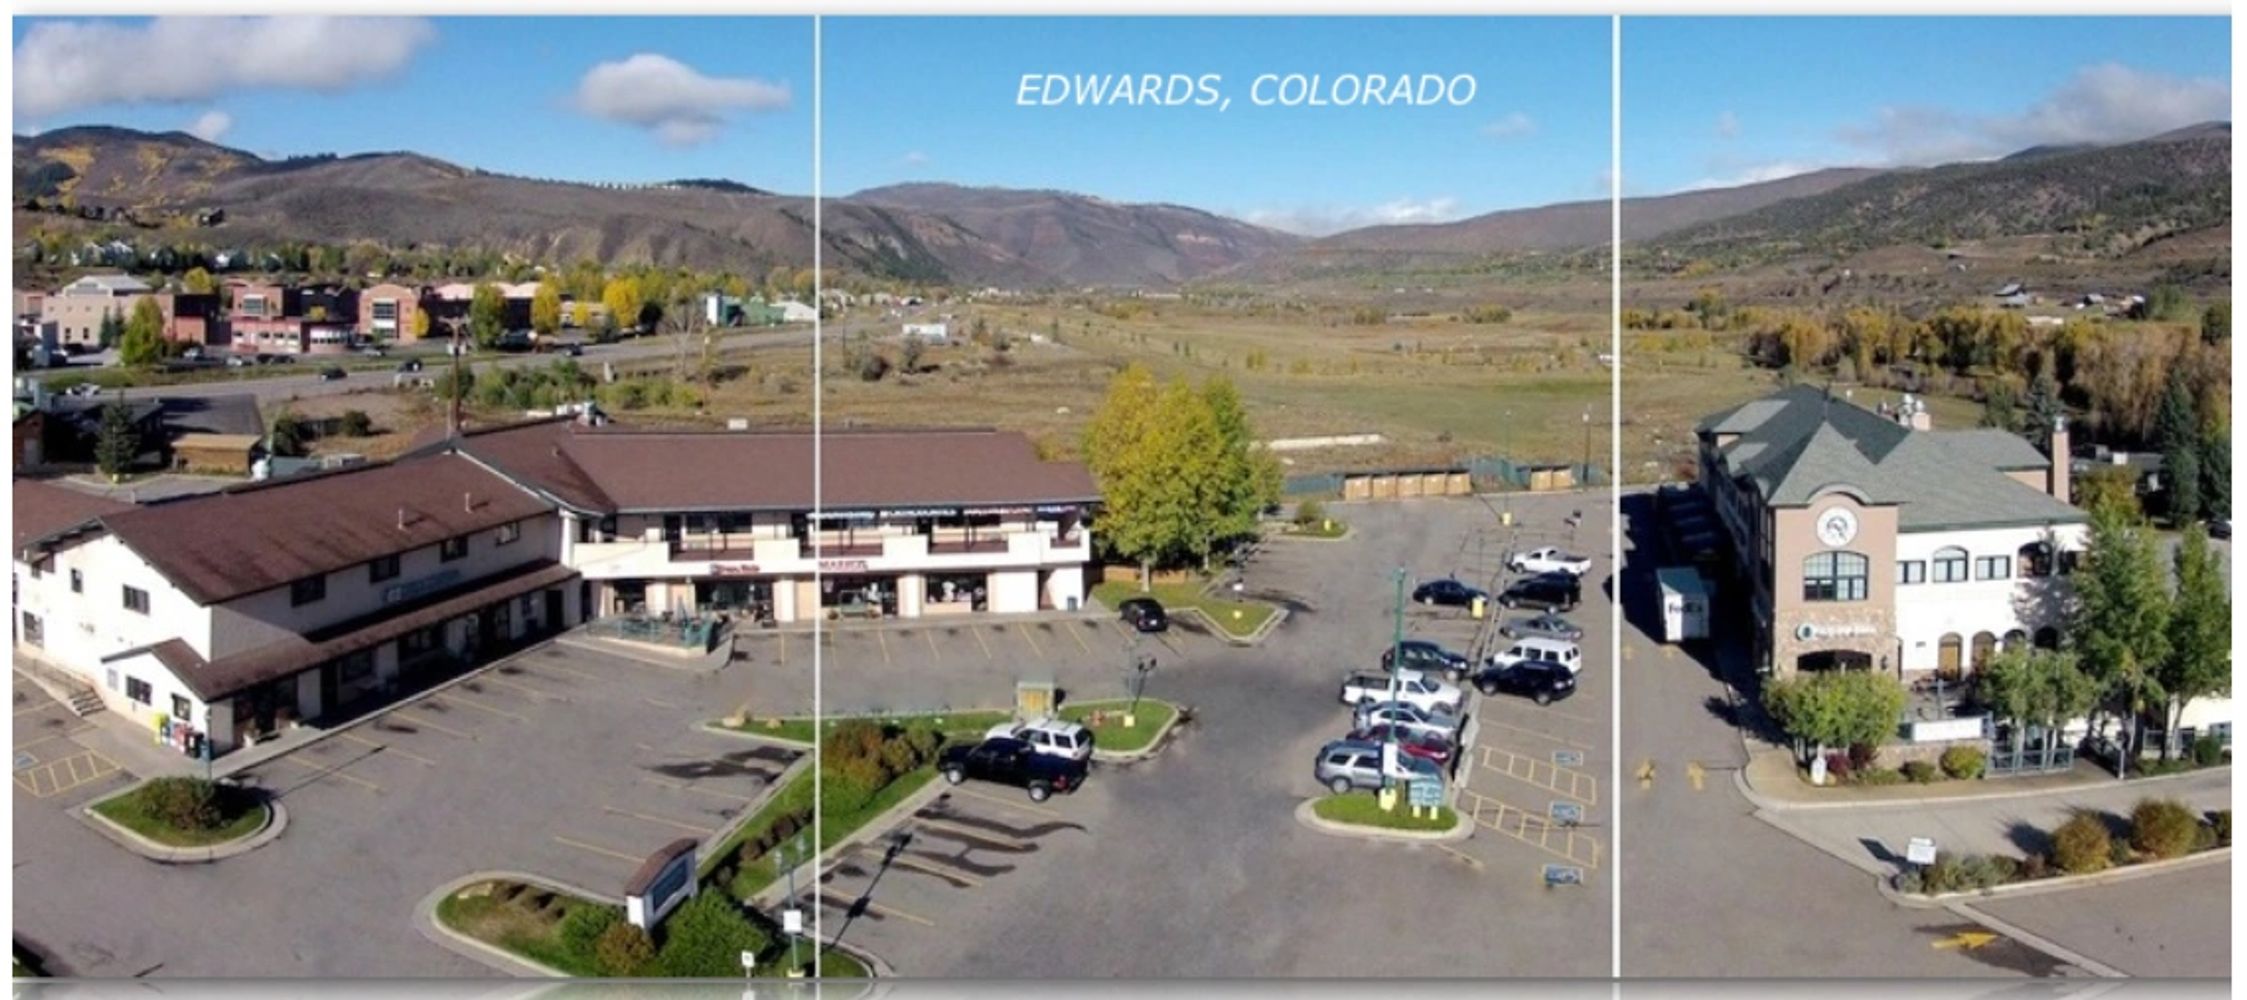 eat shop work mall food restaurant bank lease vacancy prime location vail valley edwards colorado